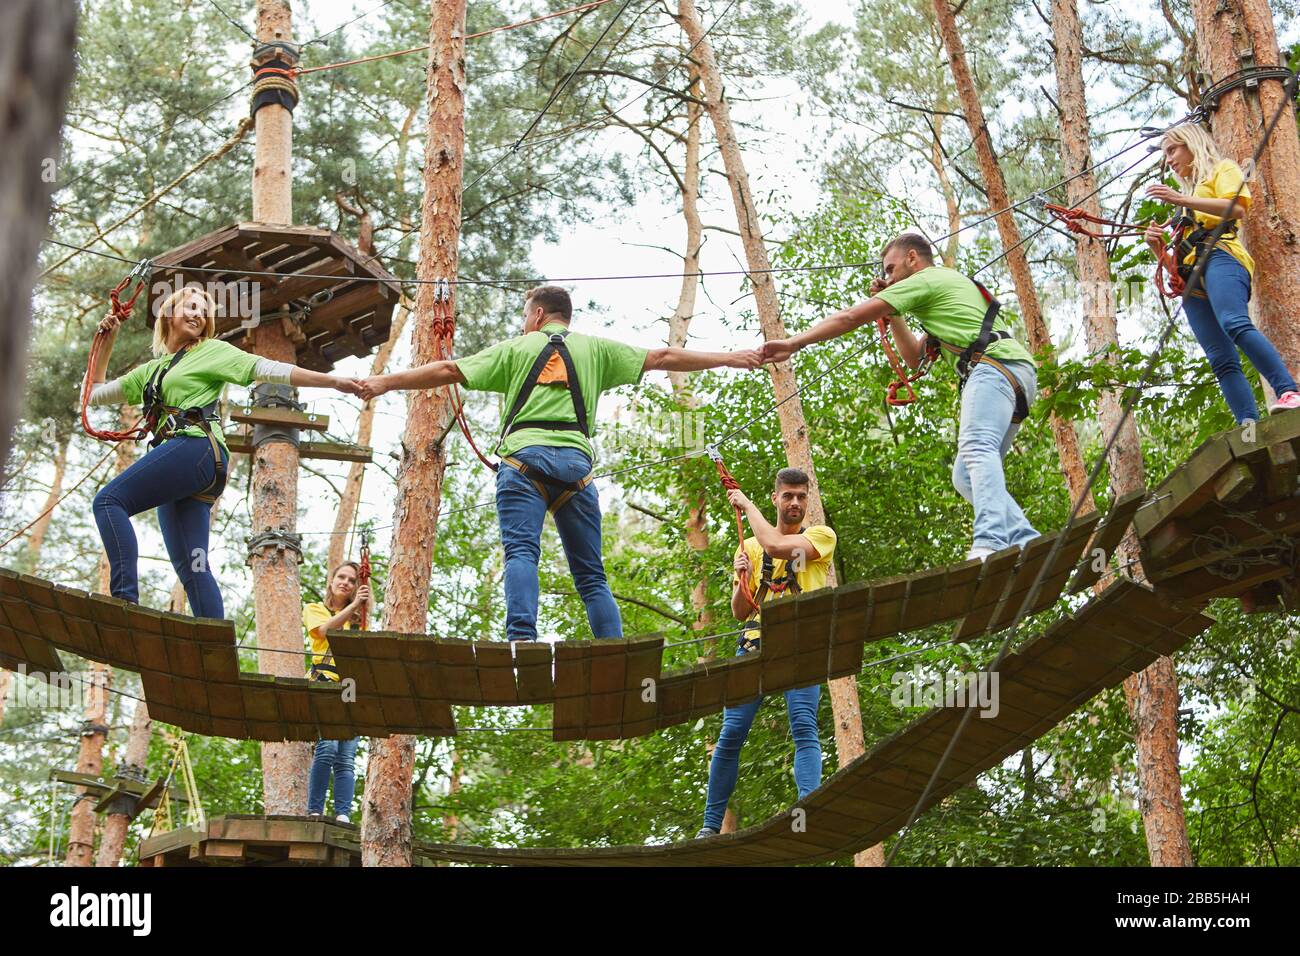 Group climbing in the high ropes course as a team building